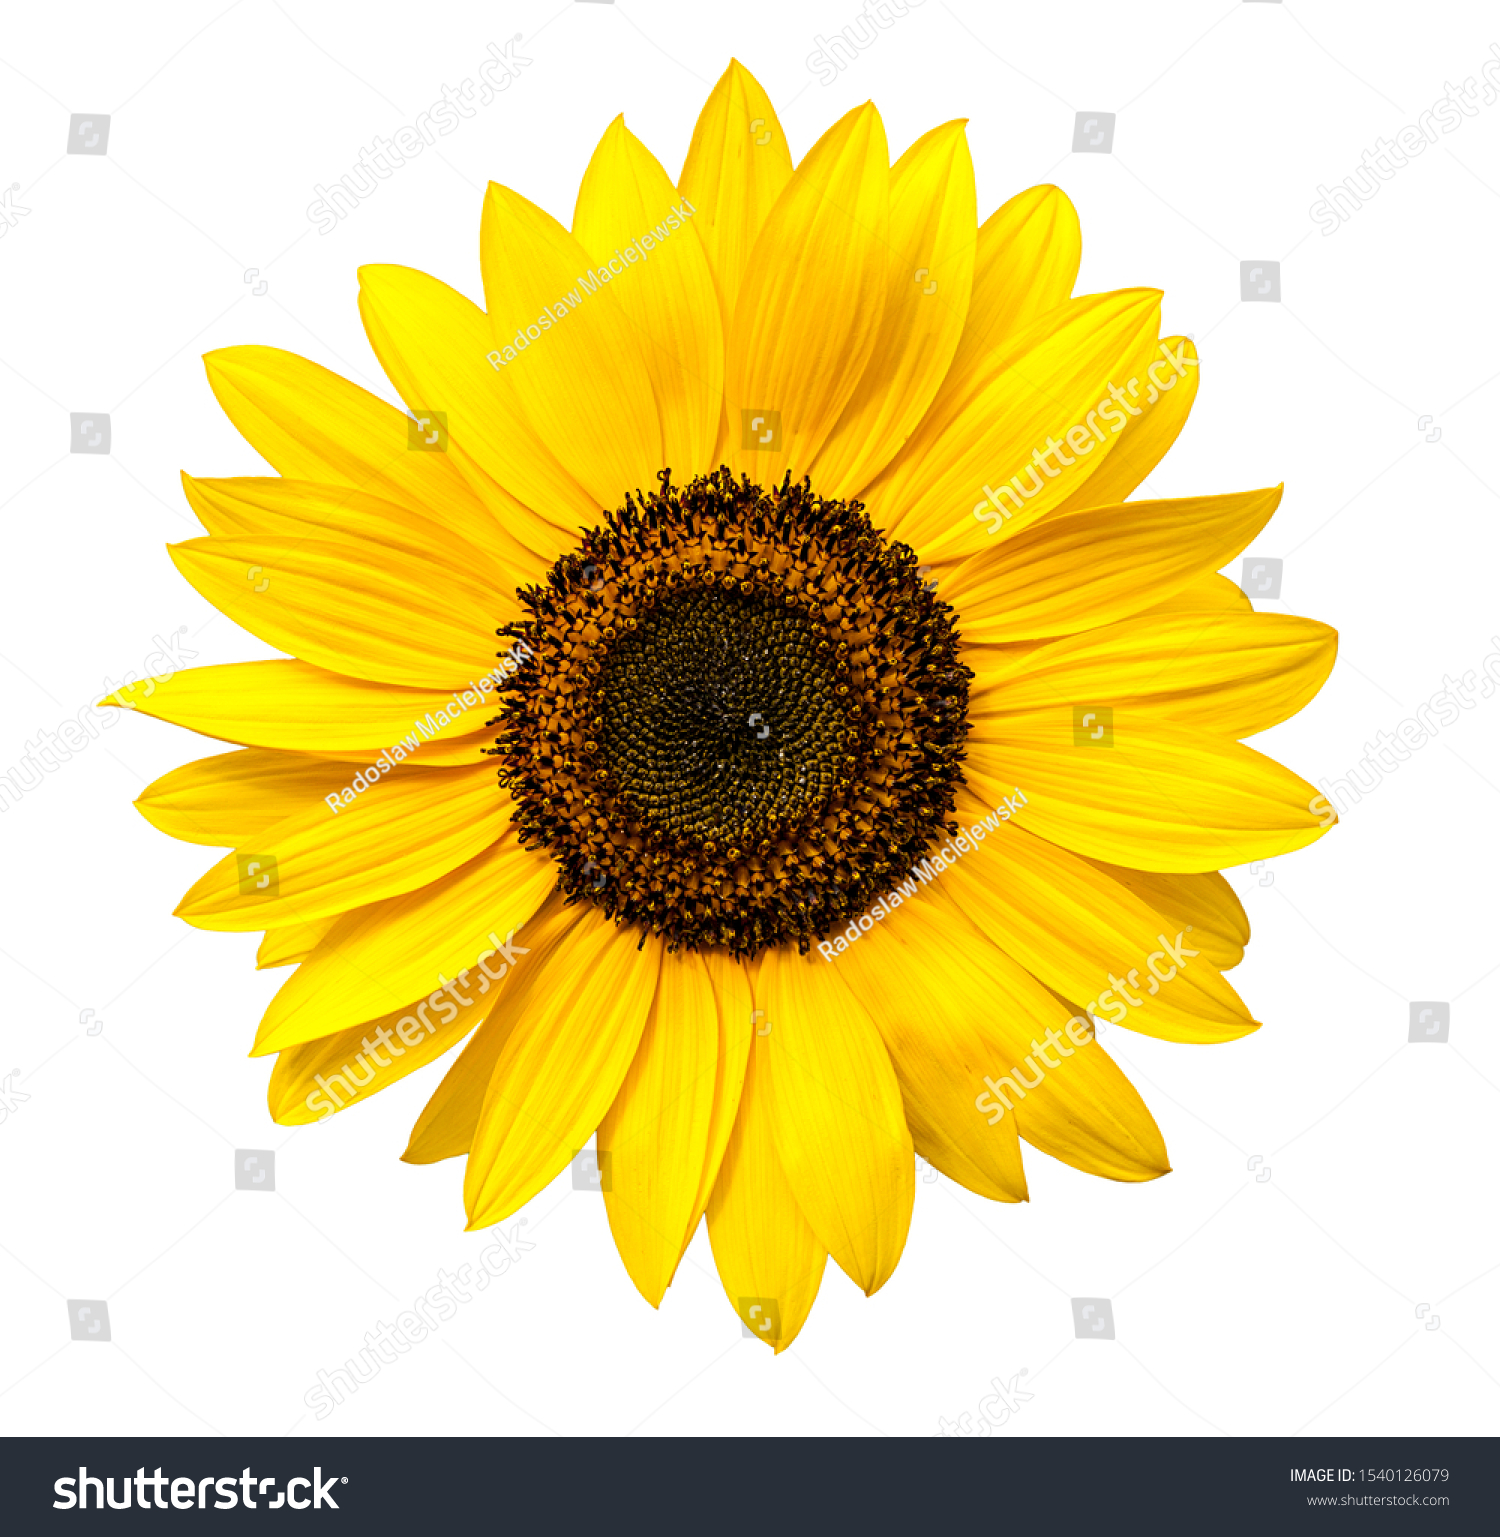 Sunflower flower isloted on a white background #1540126079